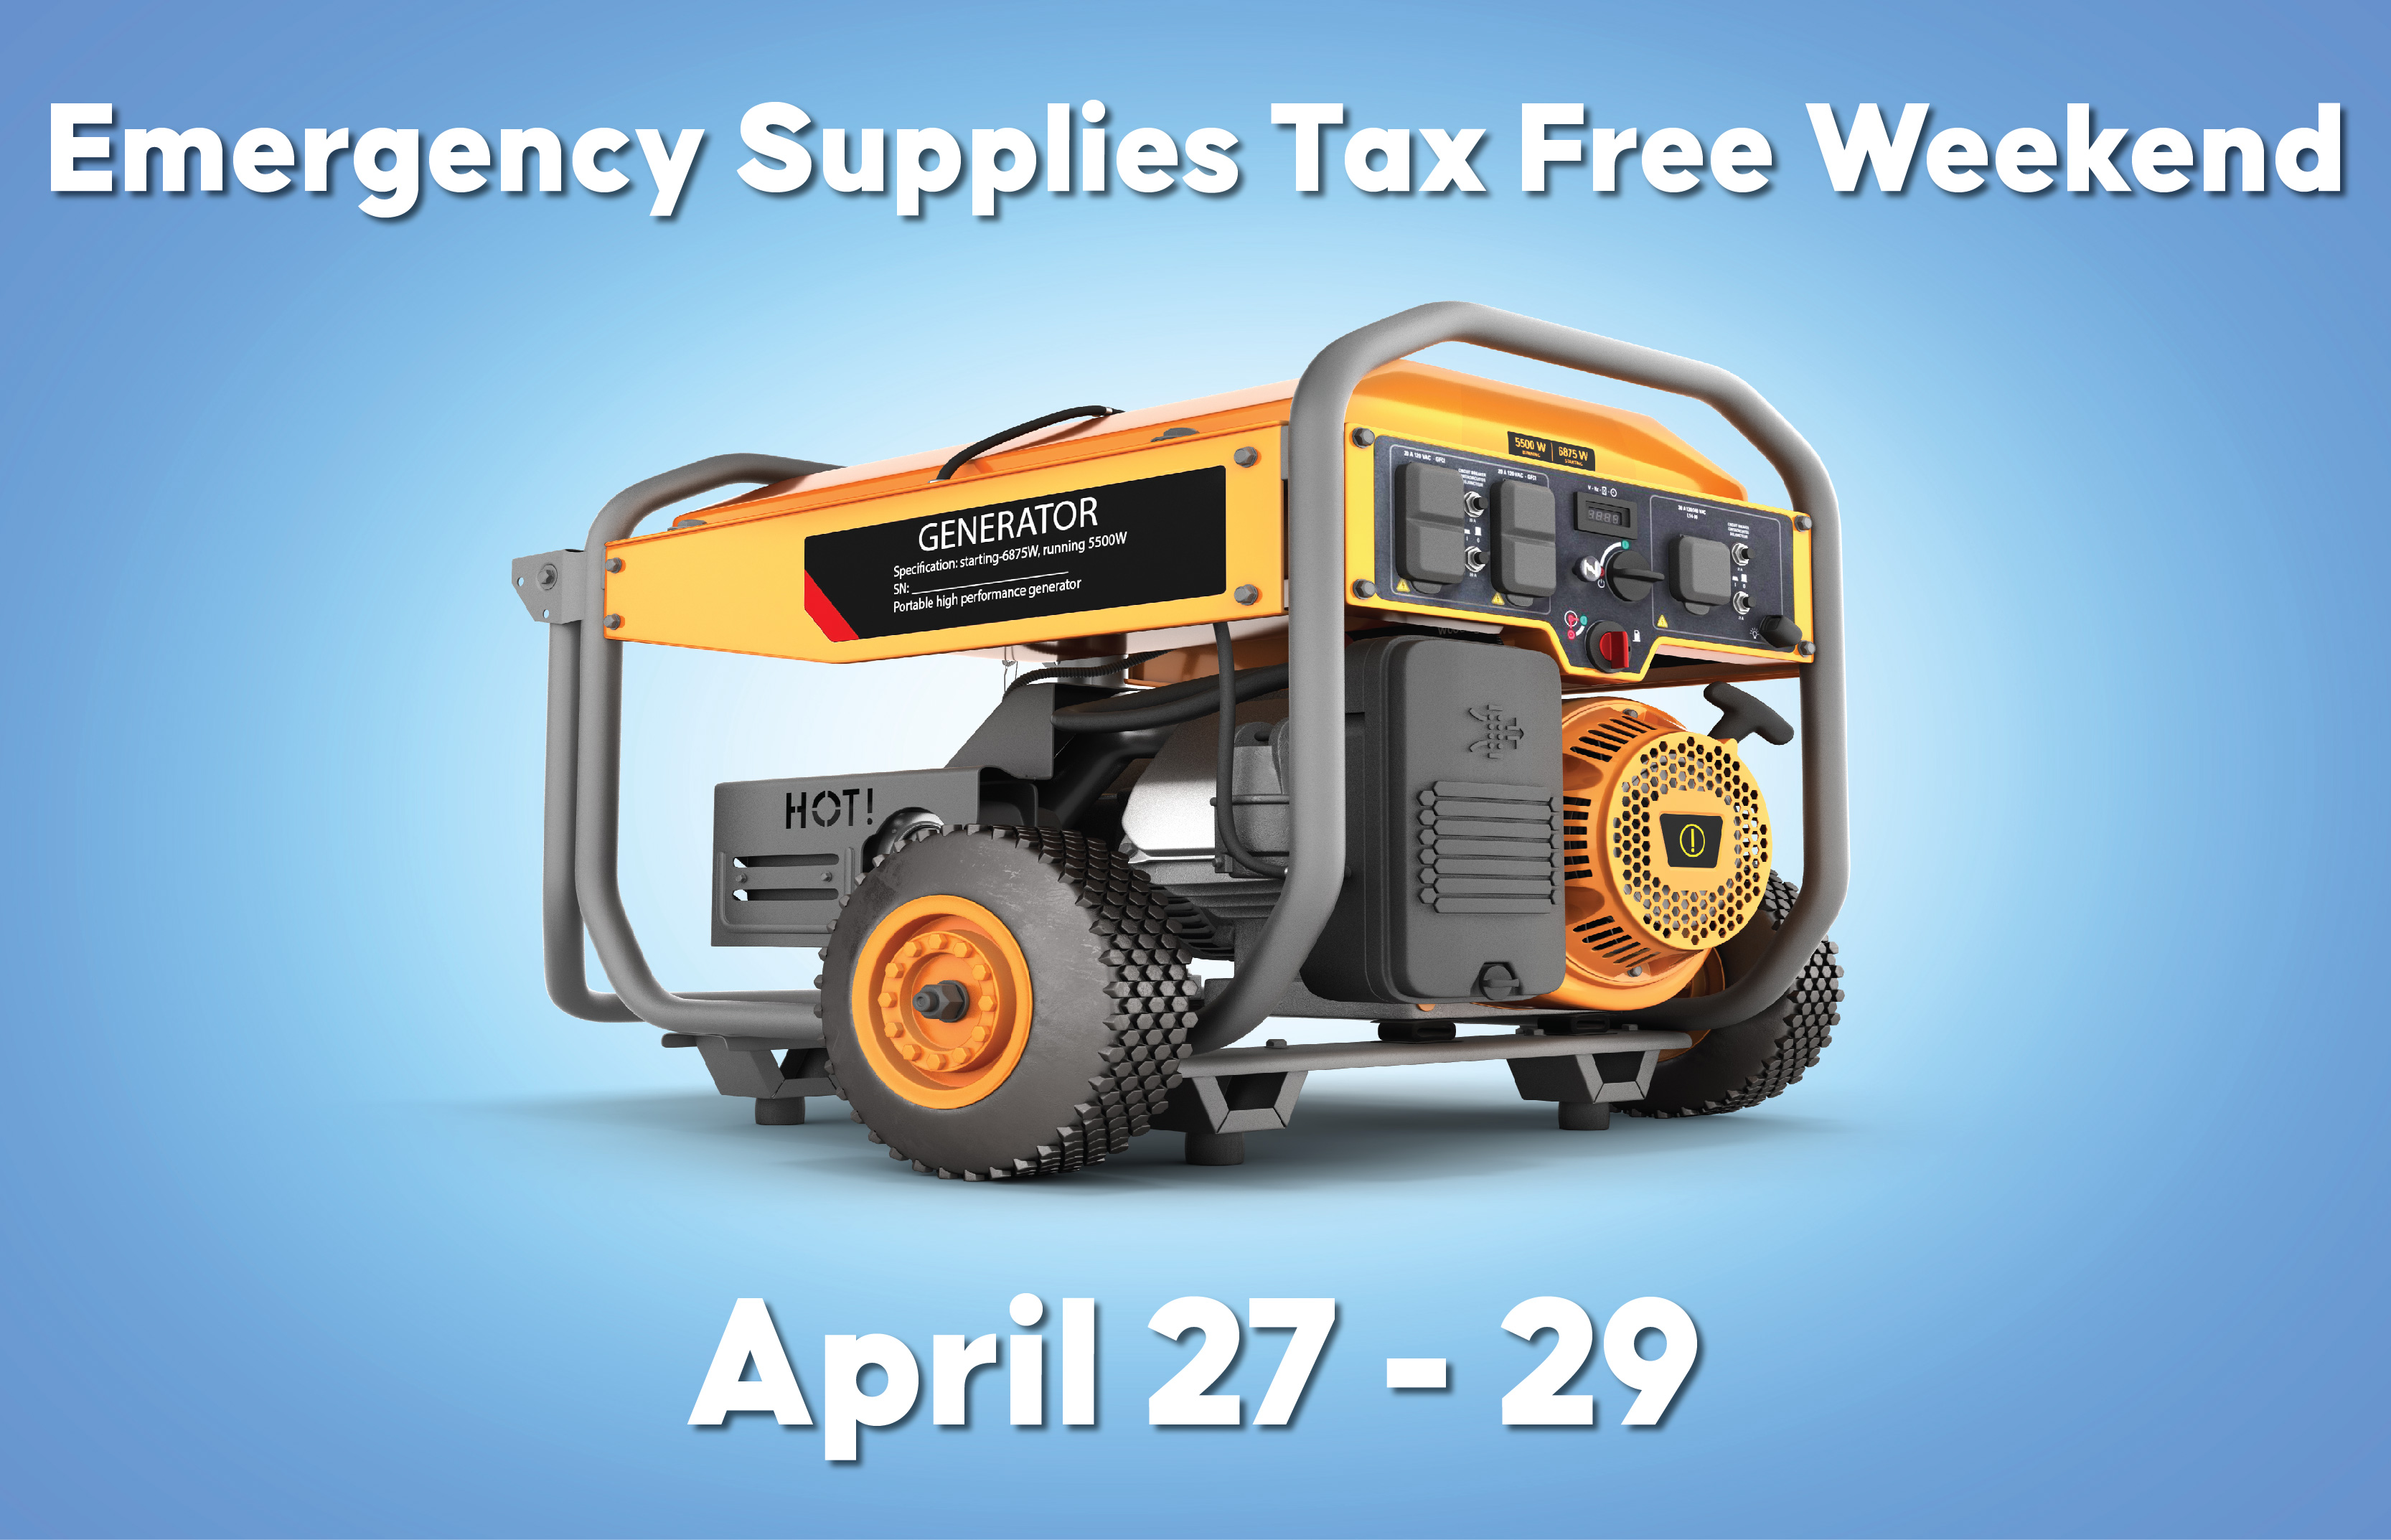 Deal Alert: Save on Emergency Supplies During Texas' Tax-Free Weekend